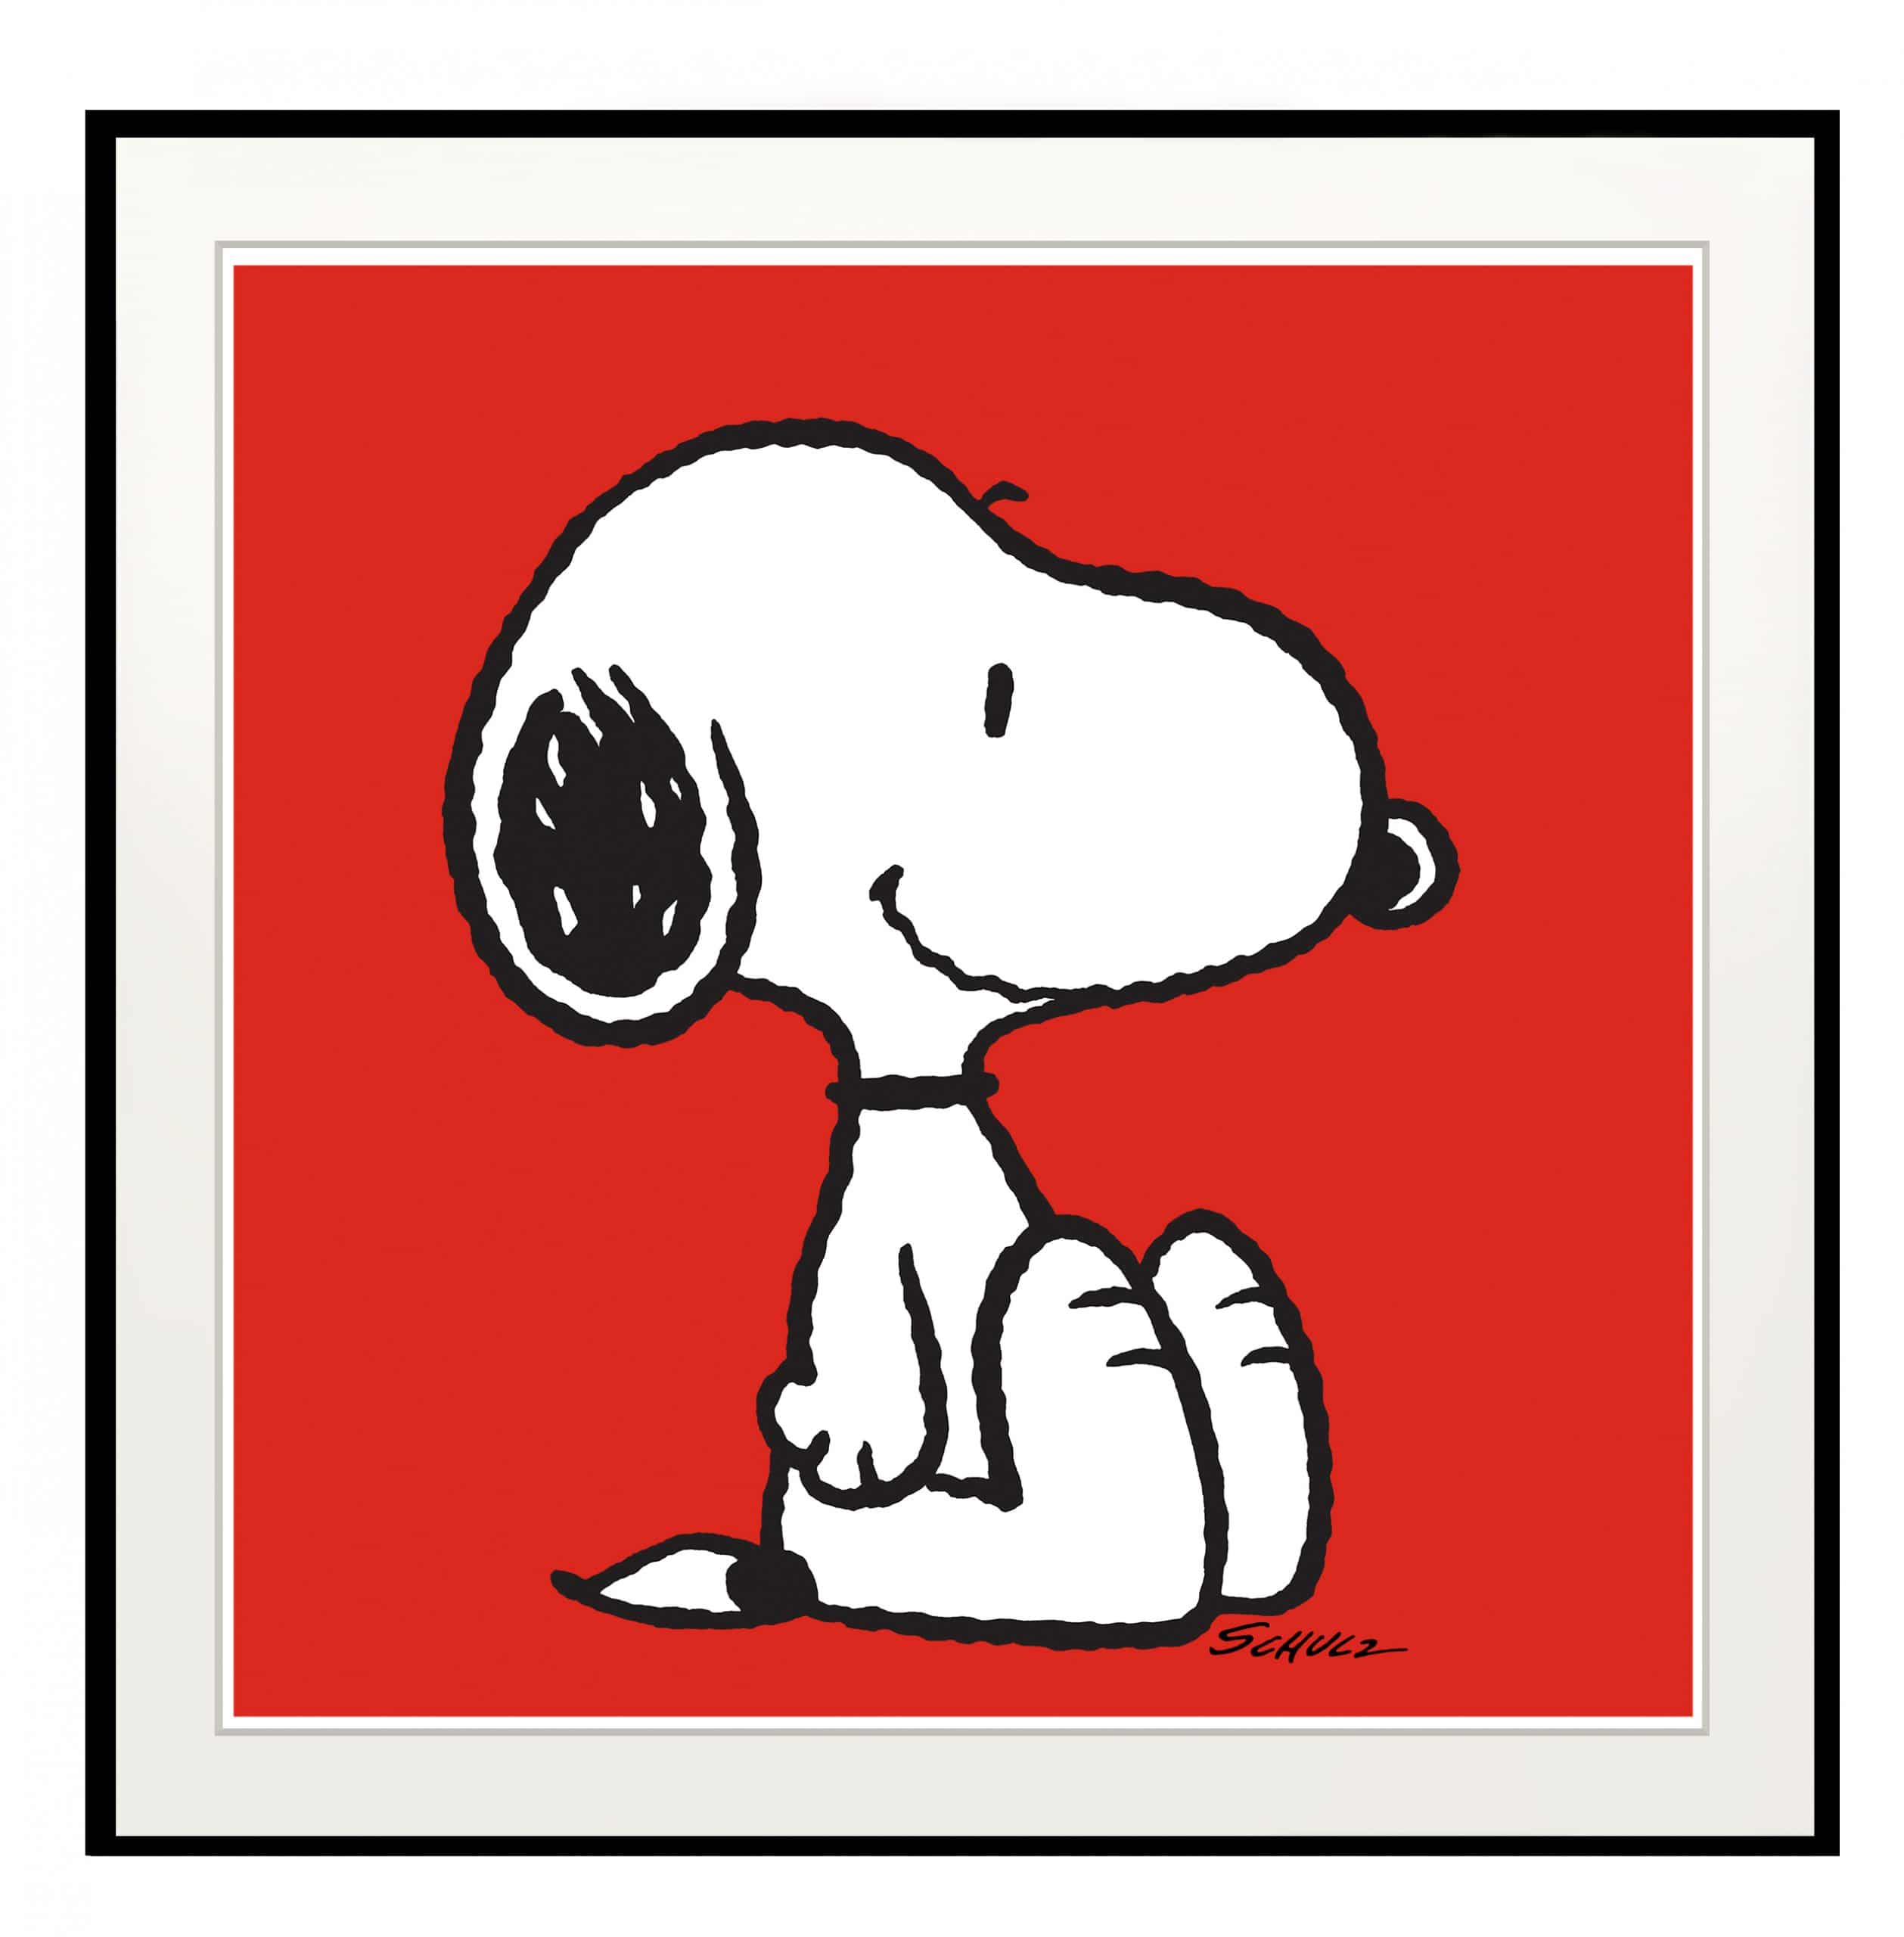 Peanuts-Snoopy-Red